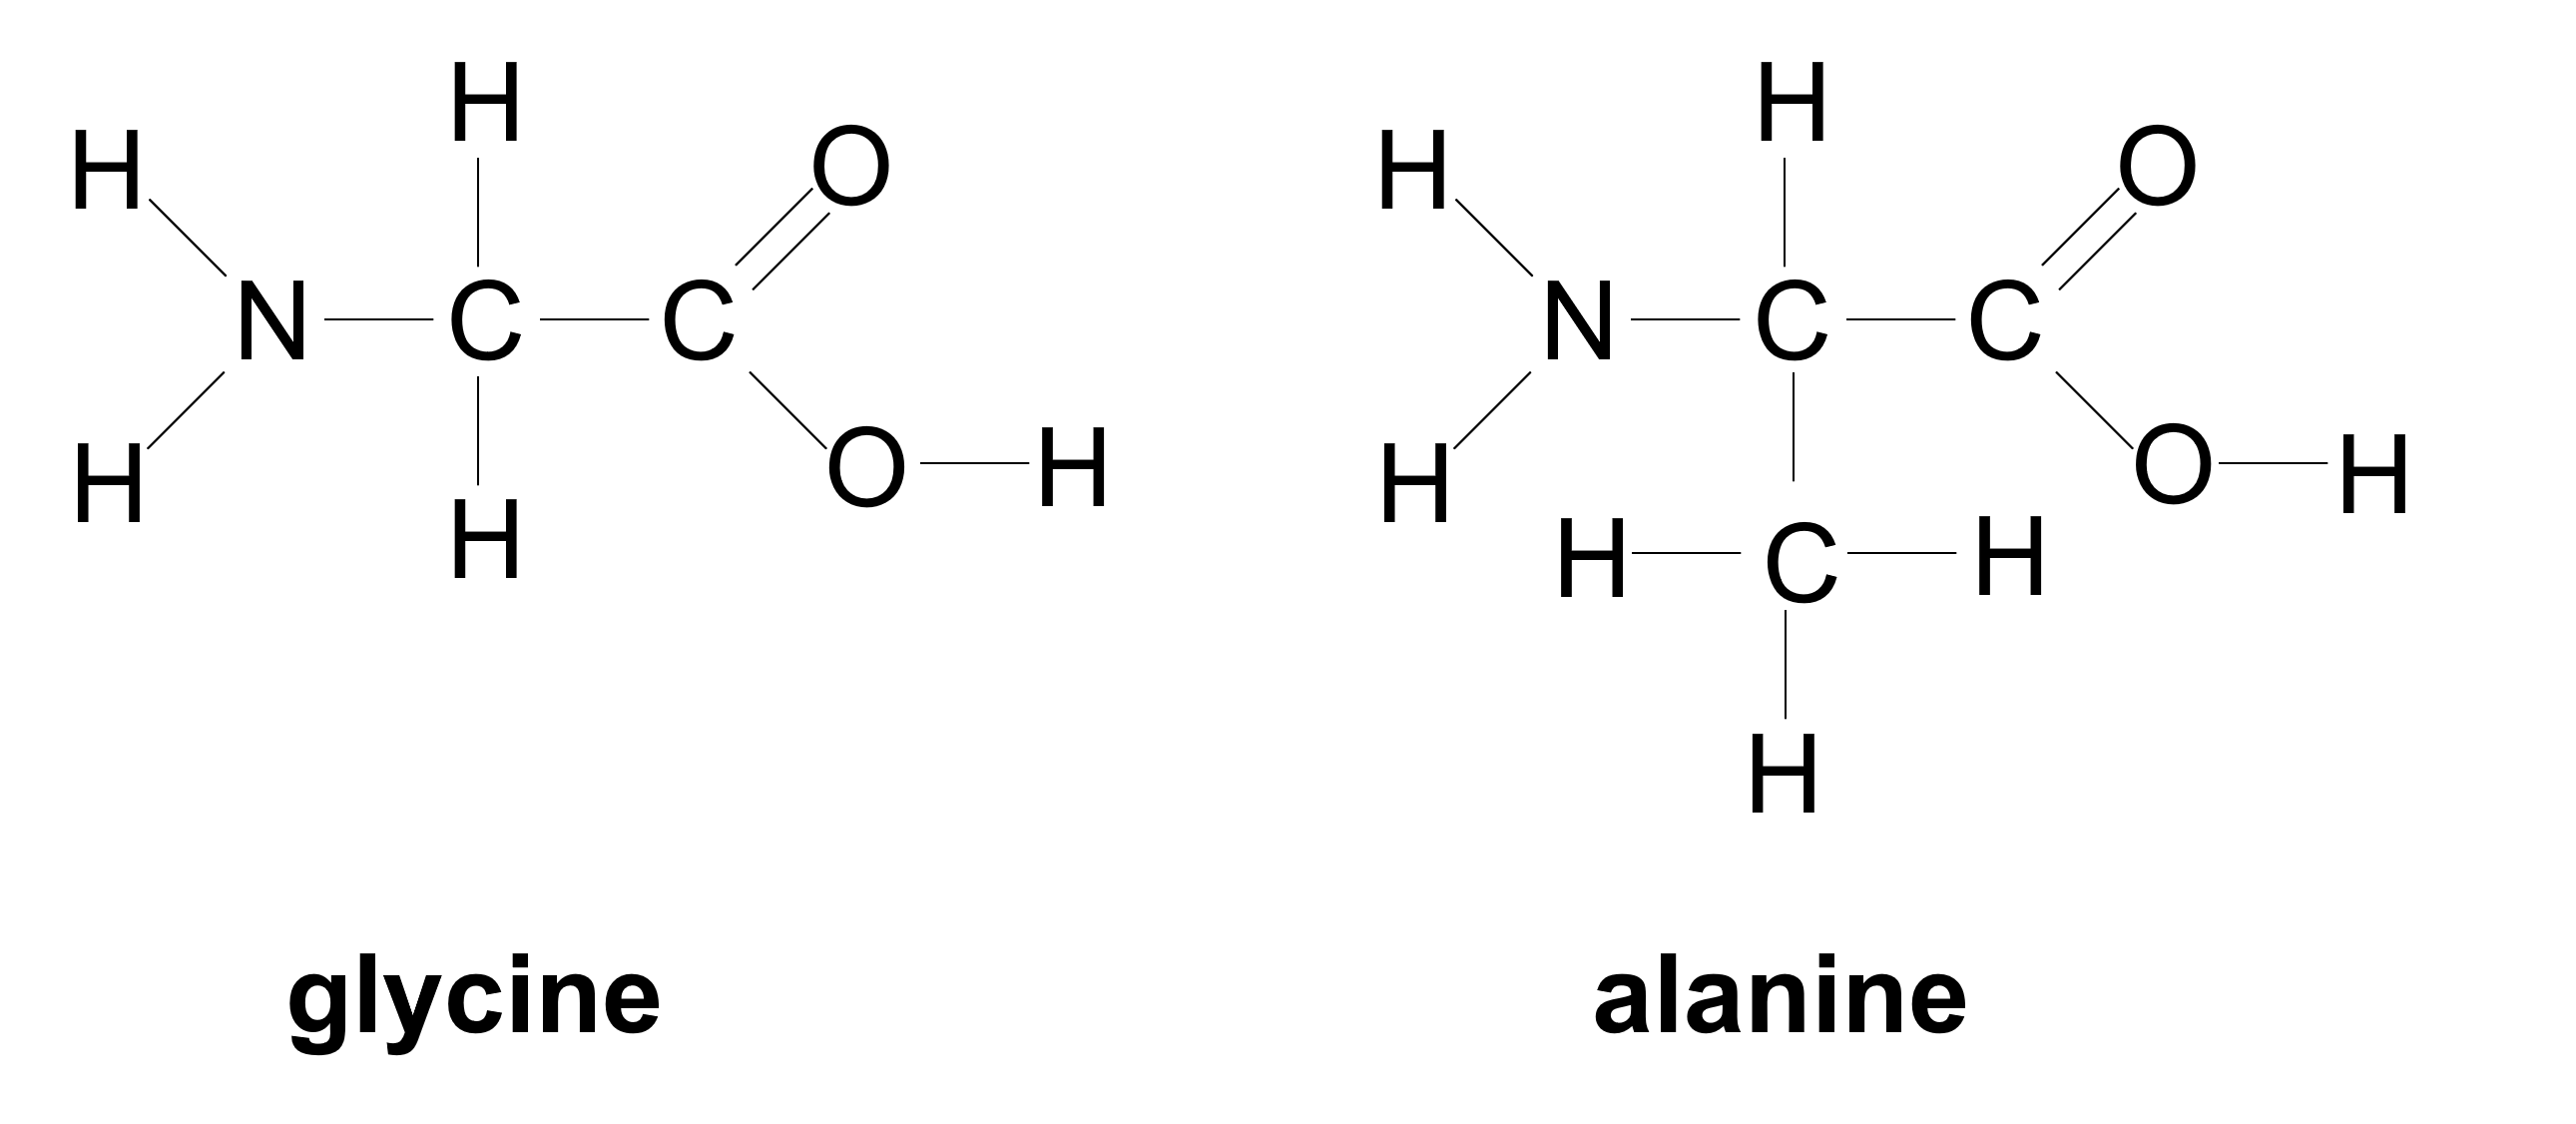 glycine and alanine chemical structures